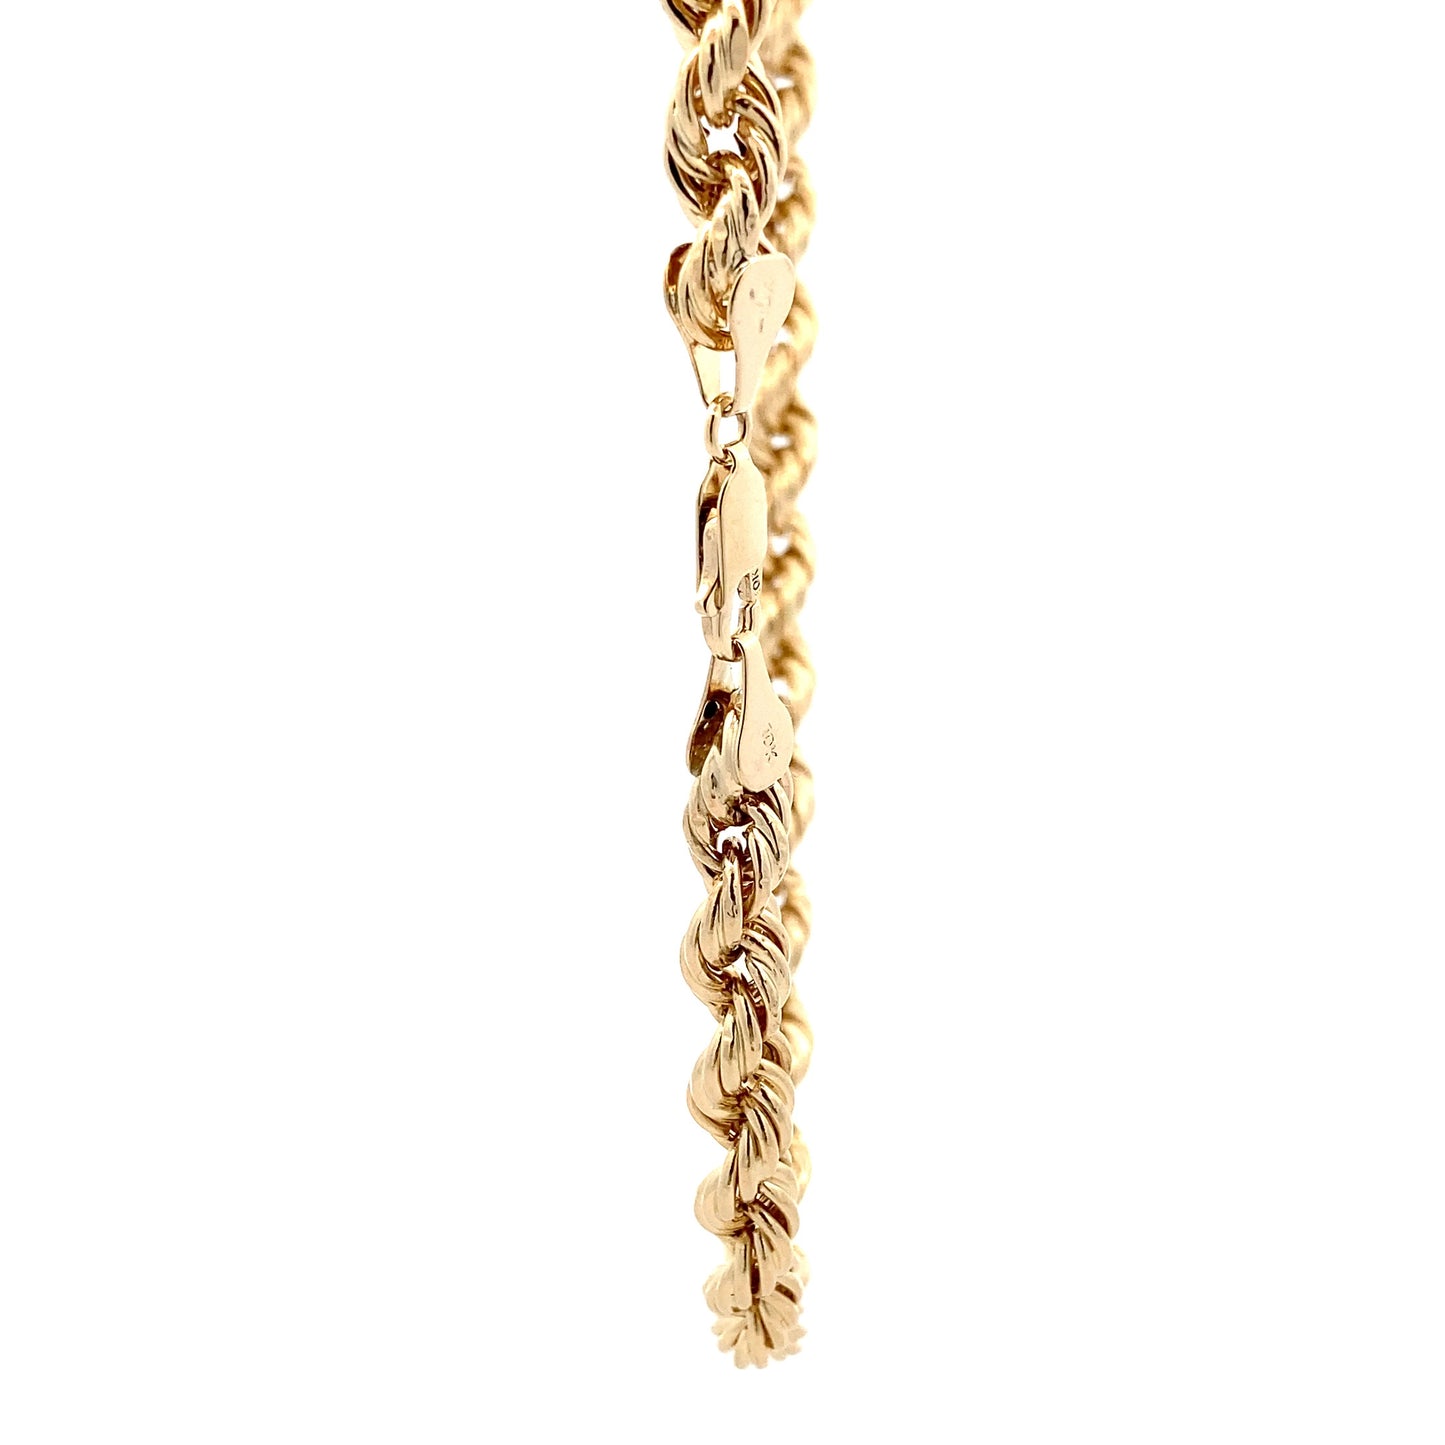 10K Yellow Gold 24.25" Hollow Rope Chain